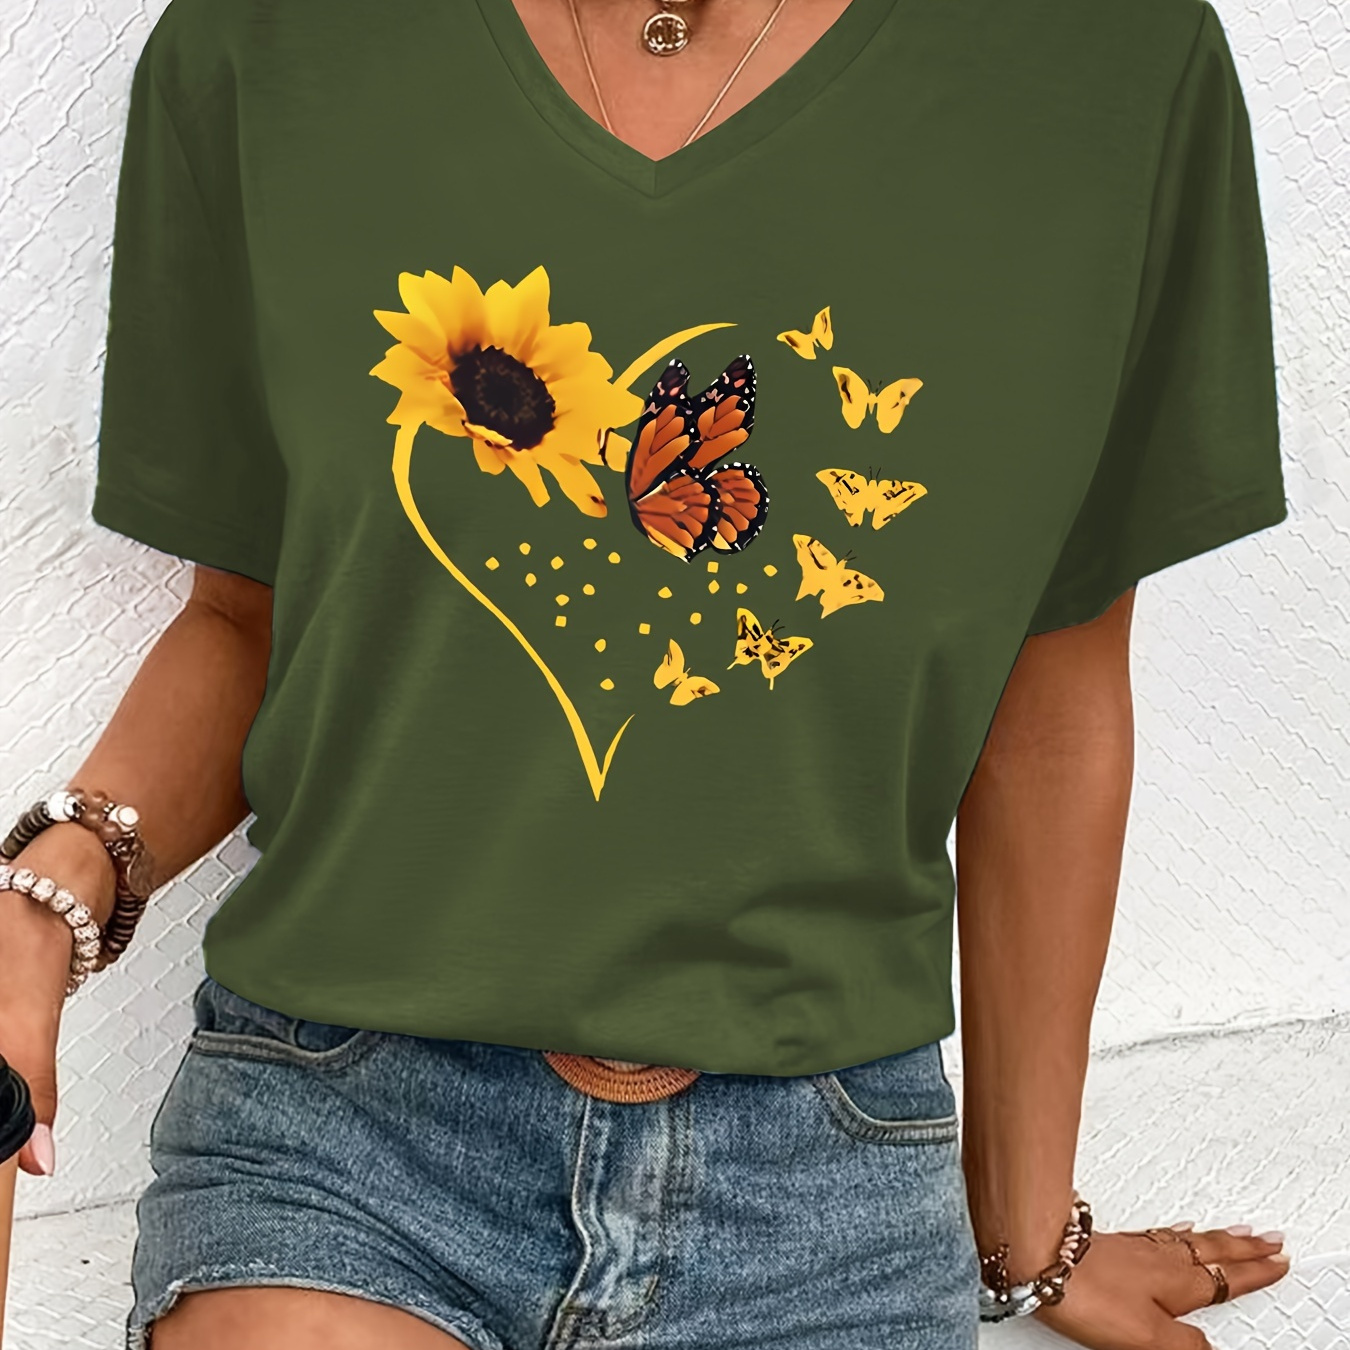 

Sunflower & Butterfly Print Casual T-shirt, Short Sleeves V Neck Stretchy Fashion Sports Tee, Women's Tops